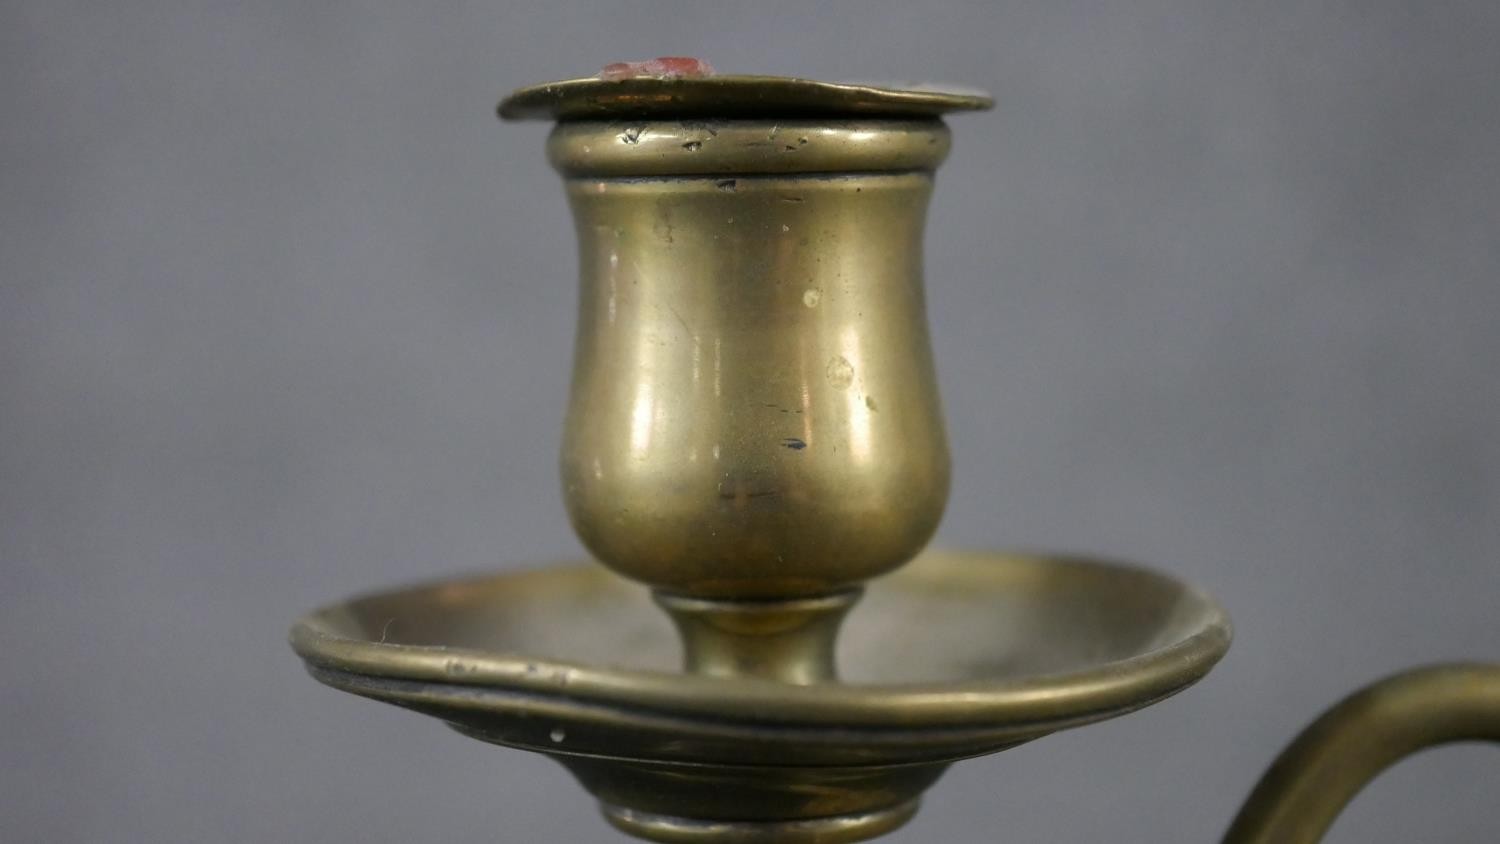 A 19th century brass double rise and fall student's candle lamp with scrolled arm supports. H.49 W. - Image 5 of 8